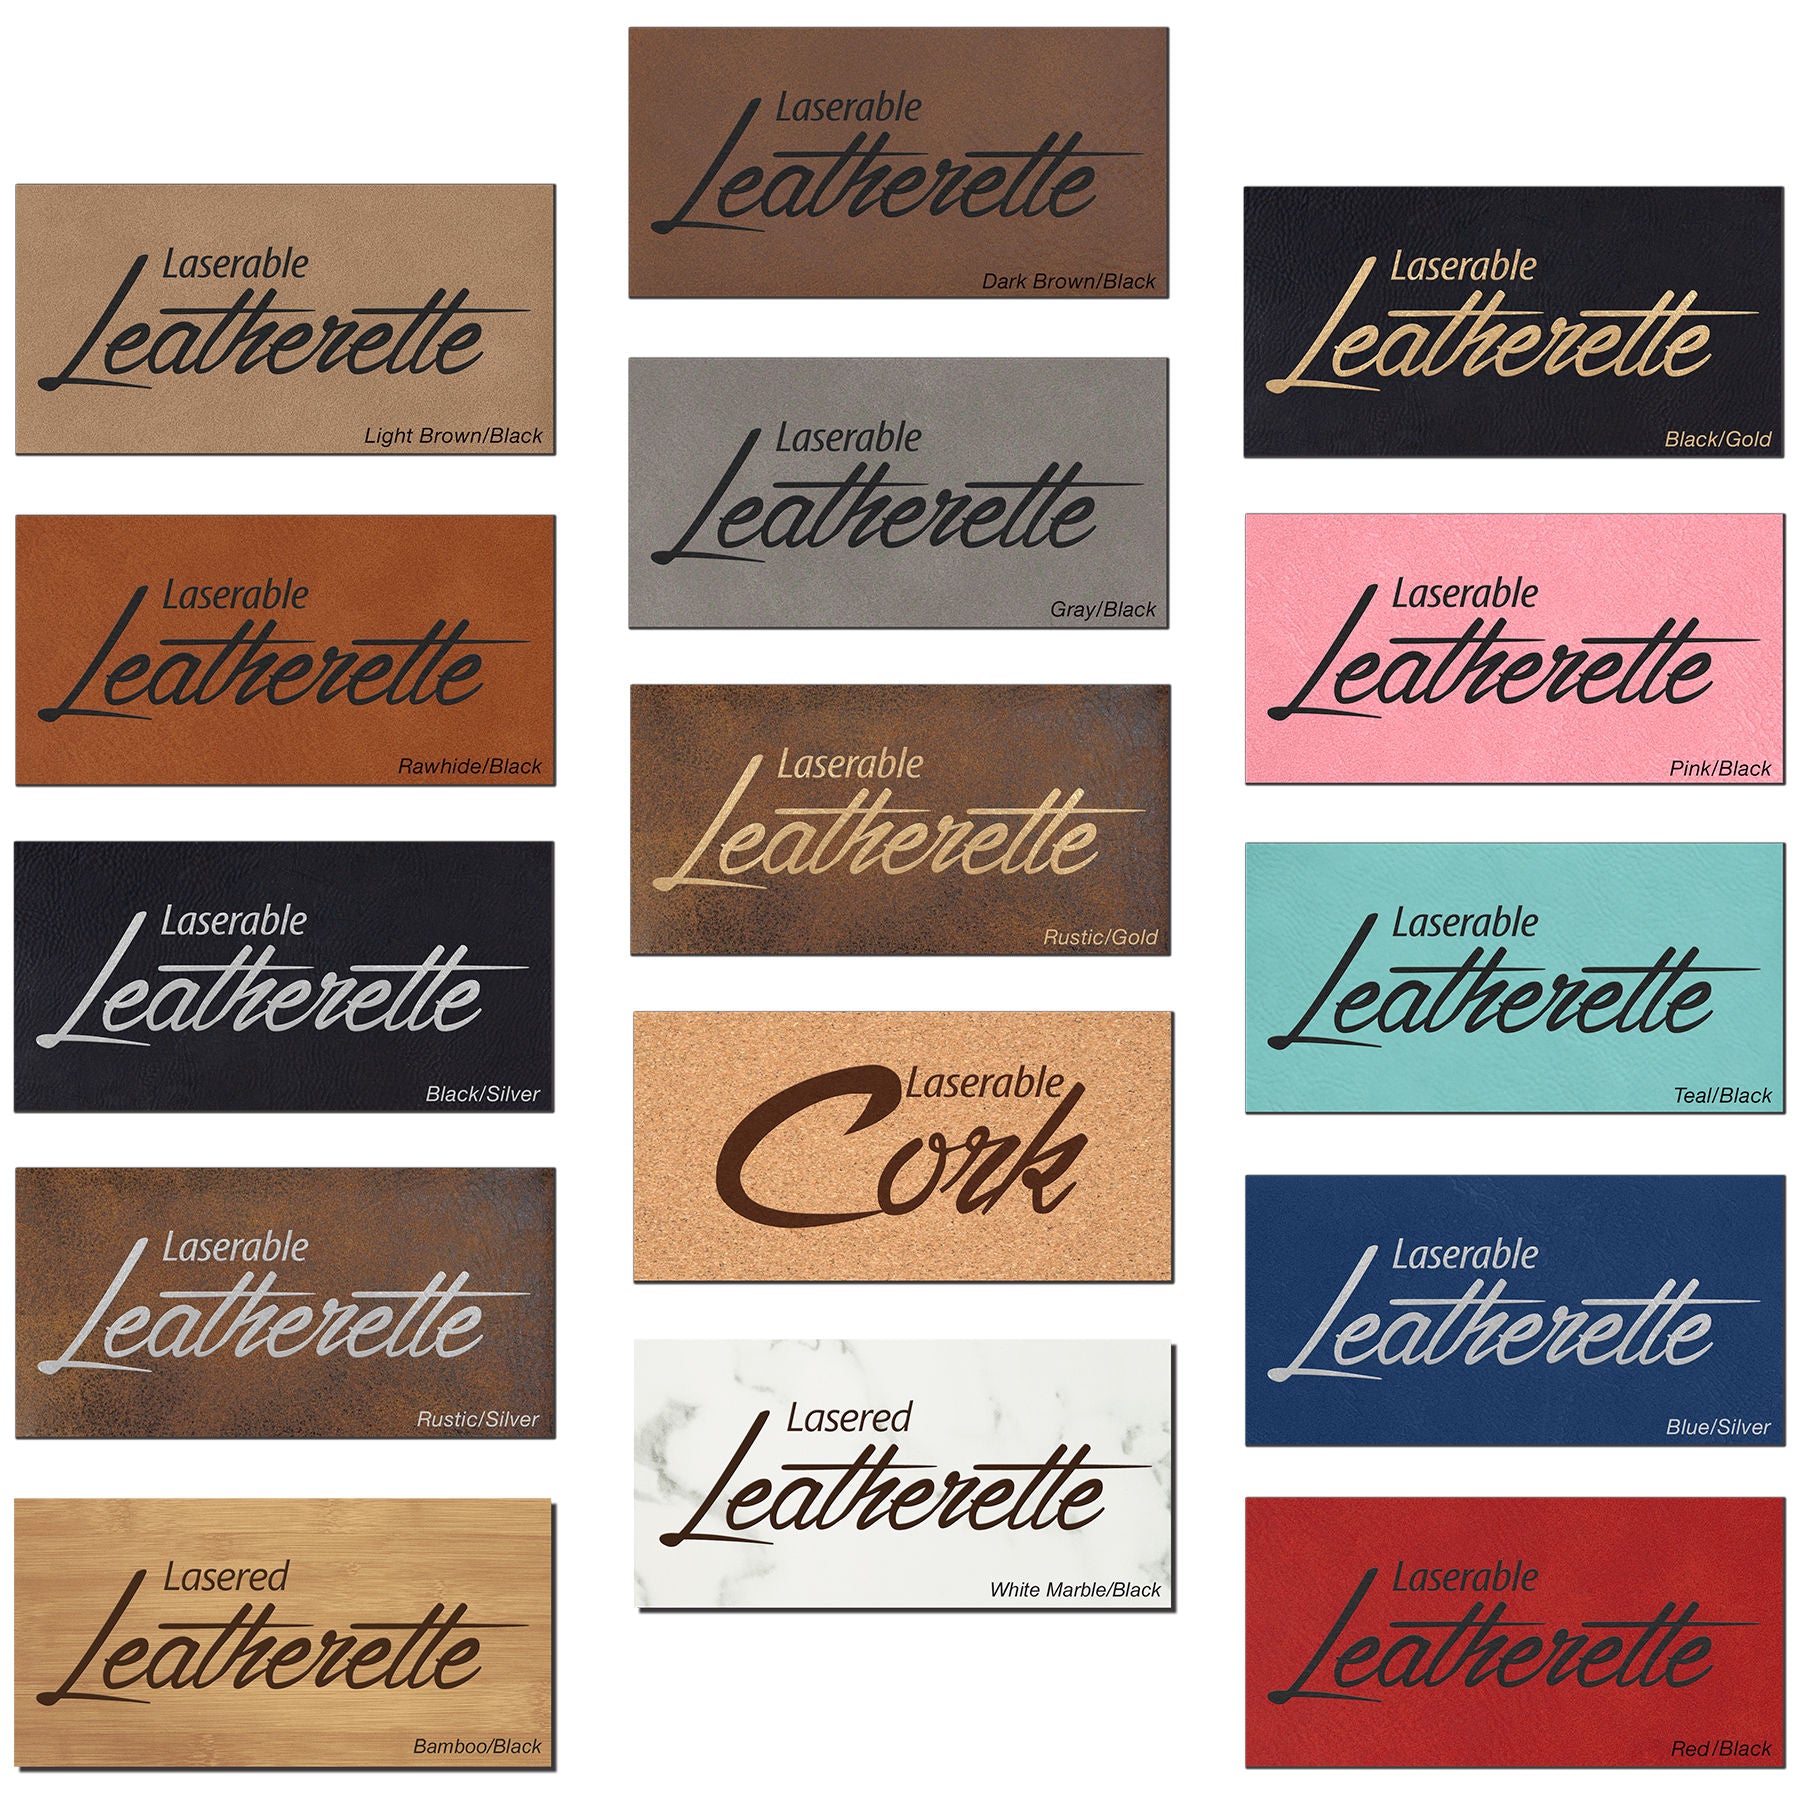 Leather Suede Leatherette Patches